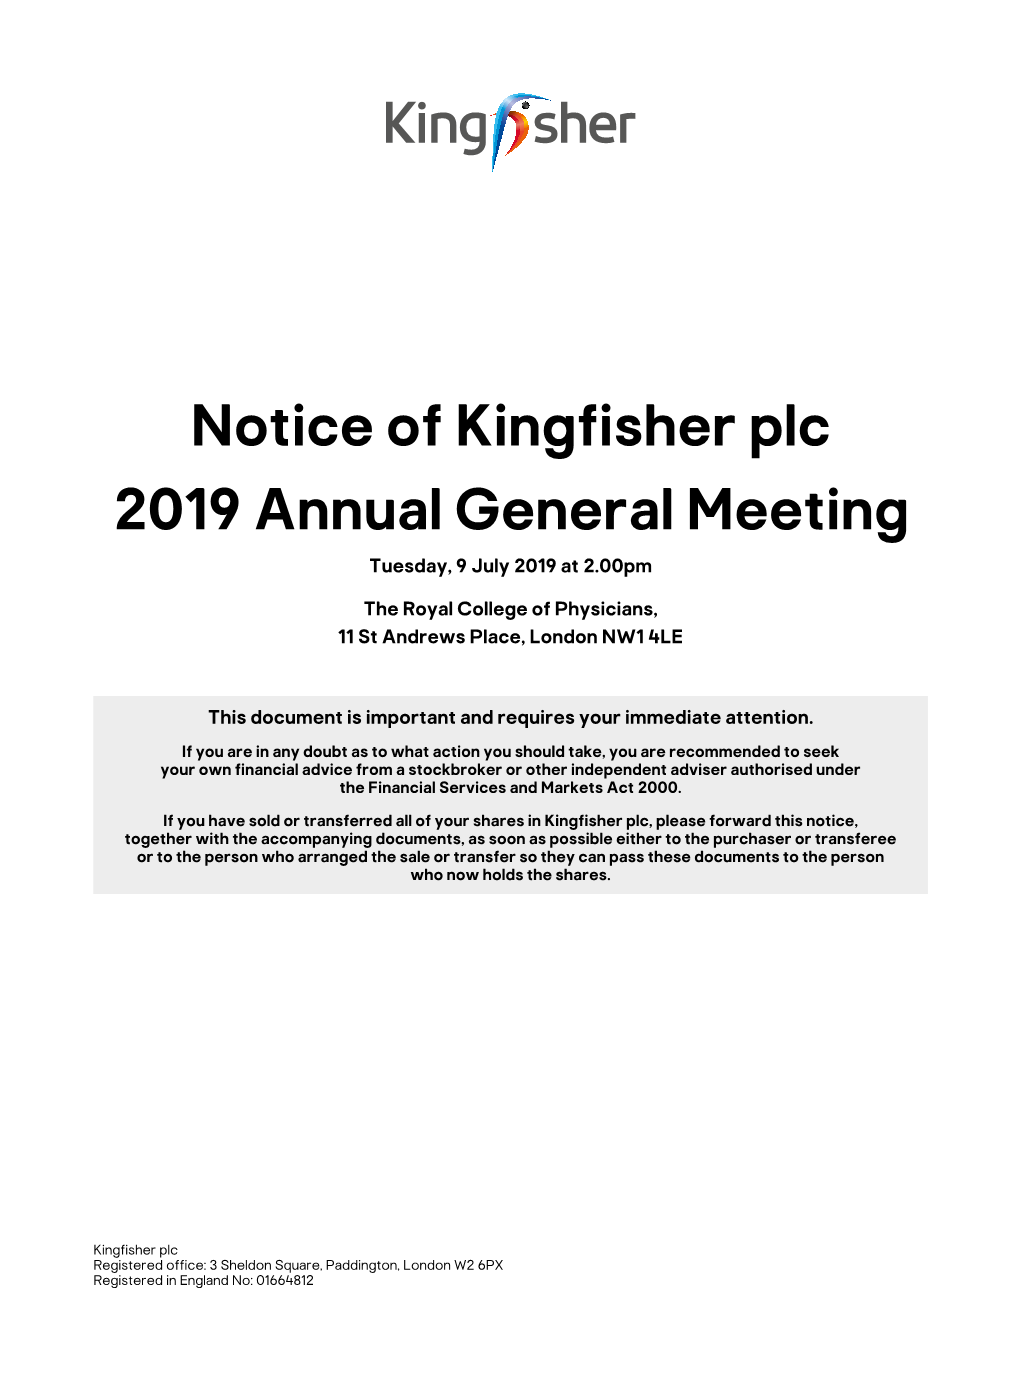 Notice of Kingfisher Plc 2019 Annual General Meeting Tuesday, 9 July 2019 at 2.00Pm